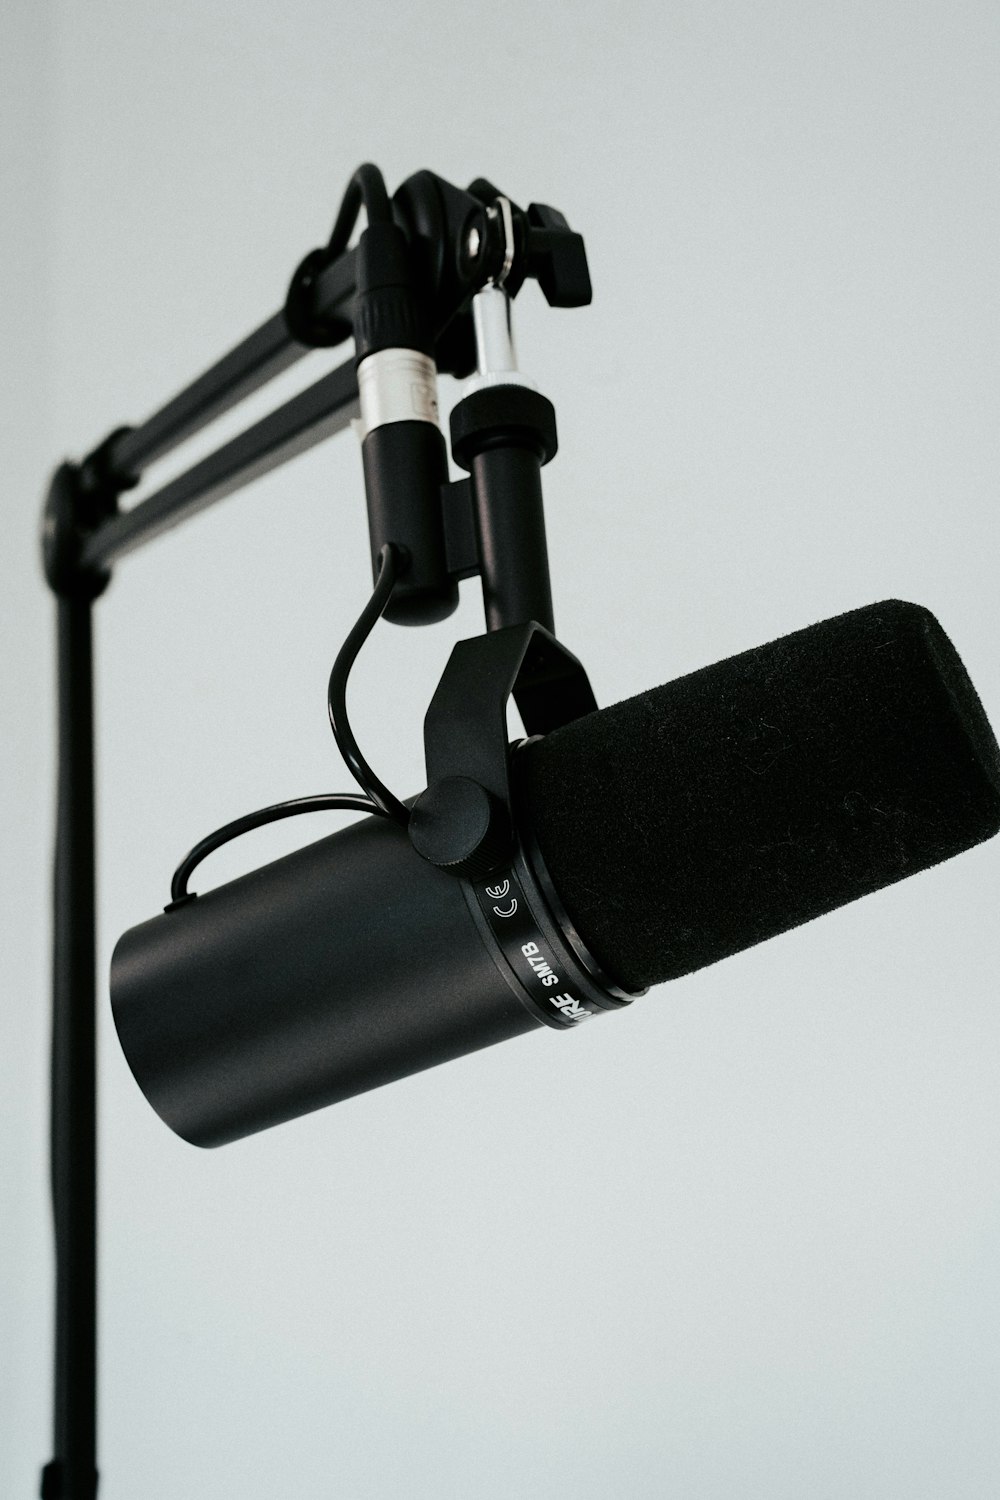 a microphone attached to a tripod on a white background